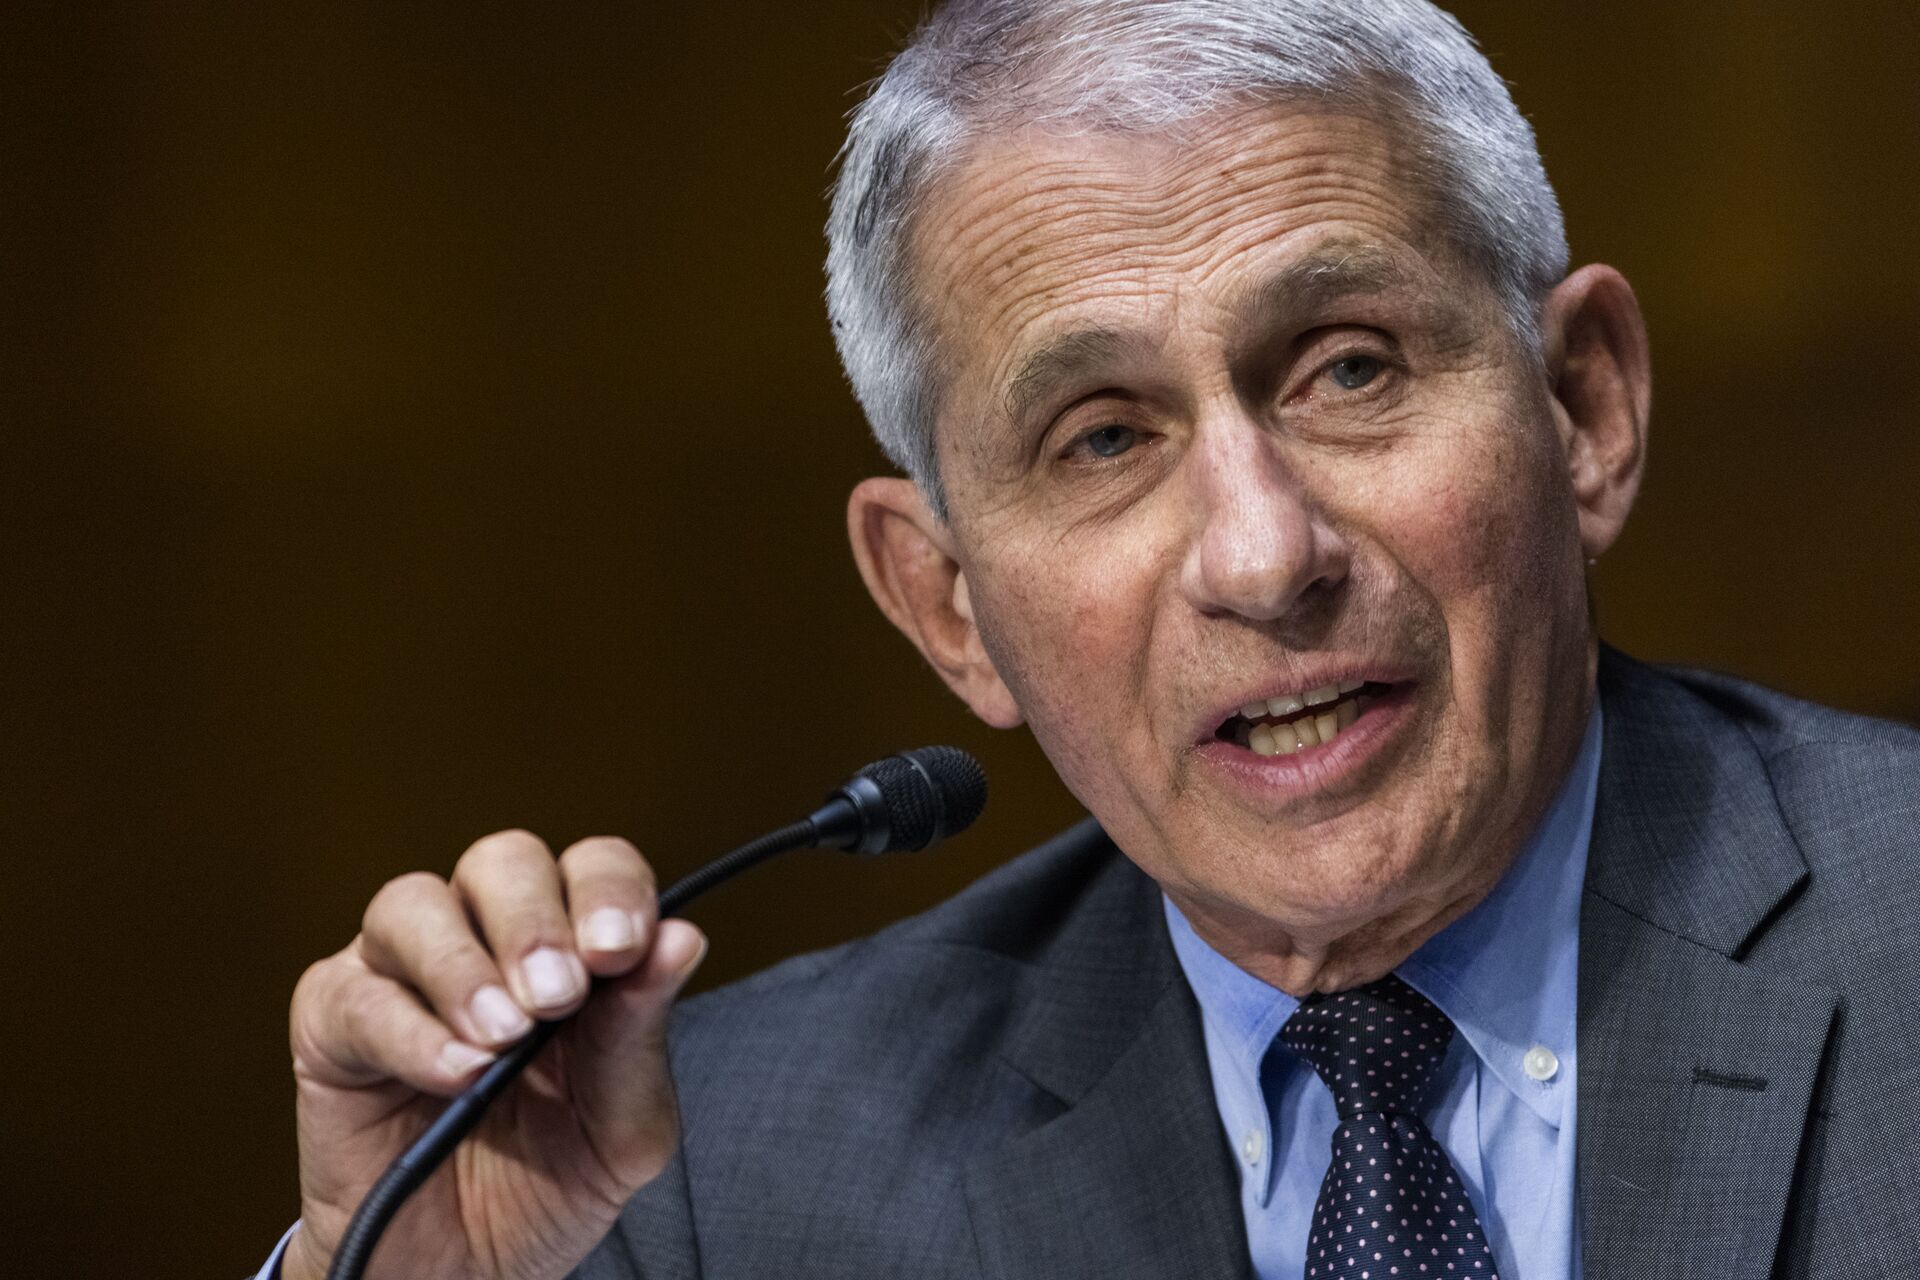 In this May 11, 2021, file photo, Dr. Anthony Fauci, director of the National Institute of Allergy and Infectious Diseases, speaks during hearing on Capitol Hill in Washington - Sputnik International, 1920, 07.09.2021